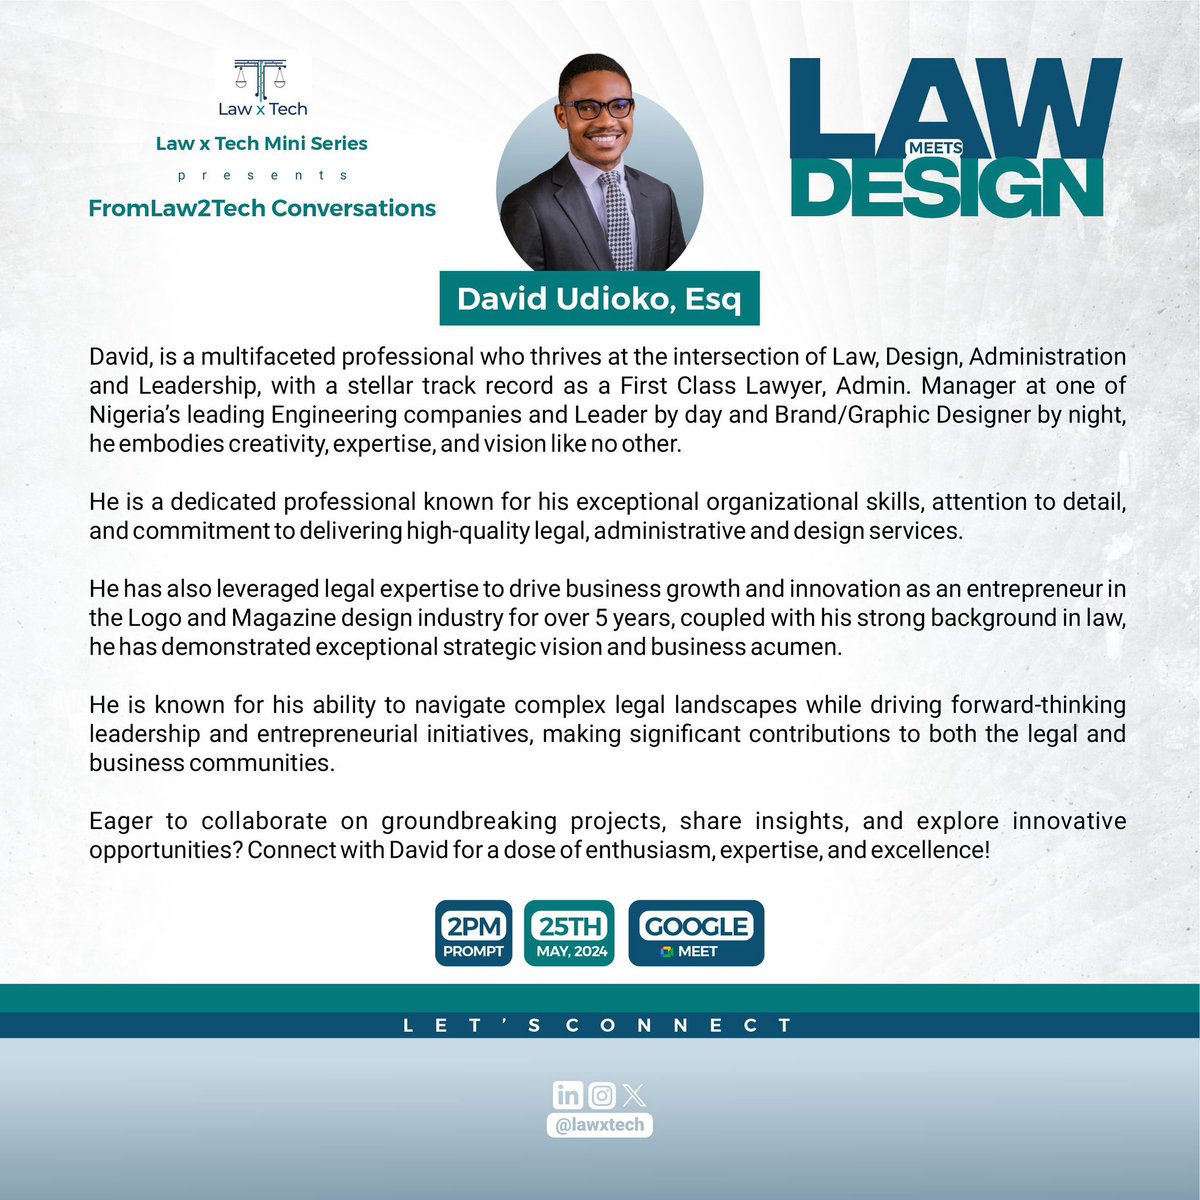 Lawyer + Graphics Designer = @DavidUdioko Let’s have FromLaw2TechConversations this Saturday at 2pm 🤗🥂 Register here —> lu.ma/d1vgtsl6